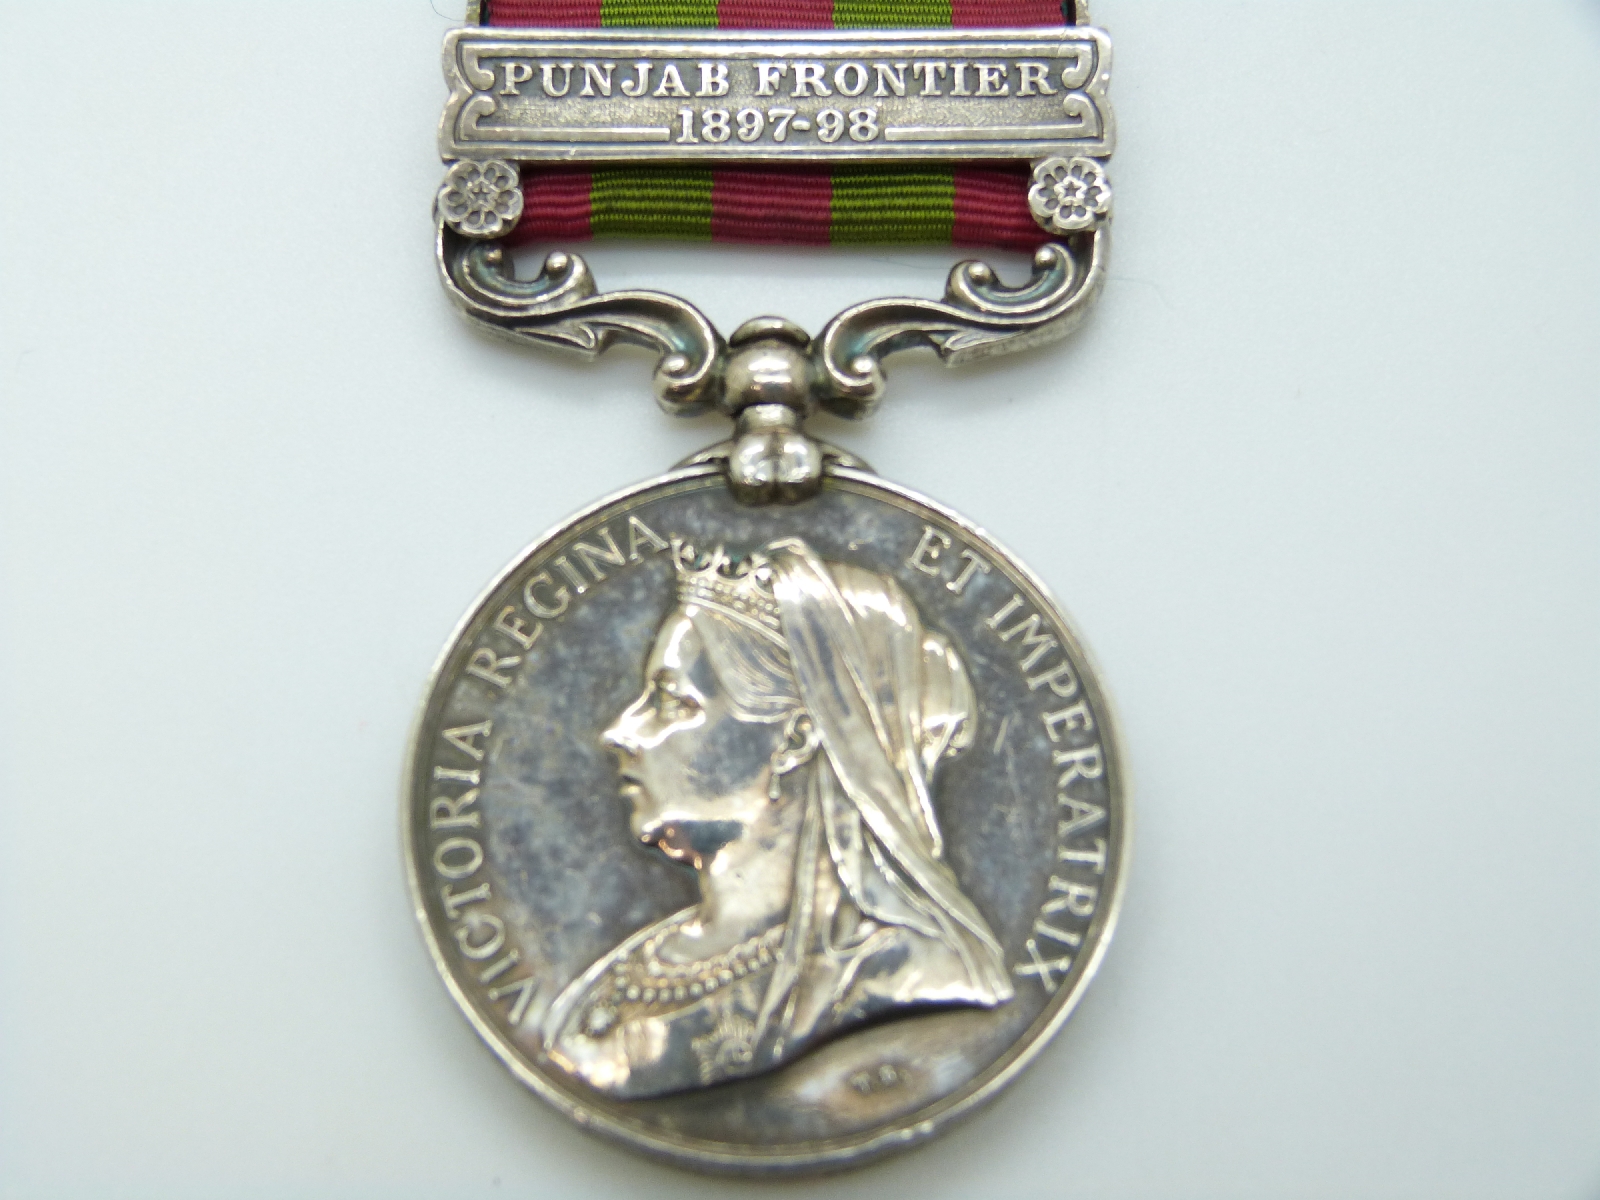 Victorian British Army Indian Medal with Punjab Frontier 1897-98 clasp named to 5361 Pvt. J. Dunn - Image 2 of 8